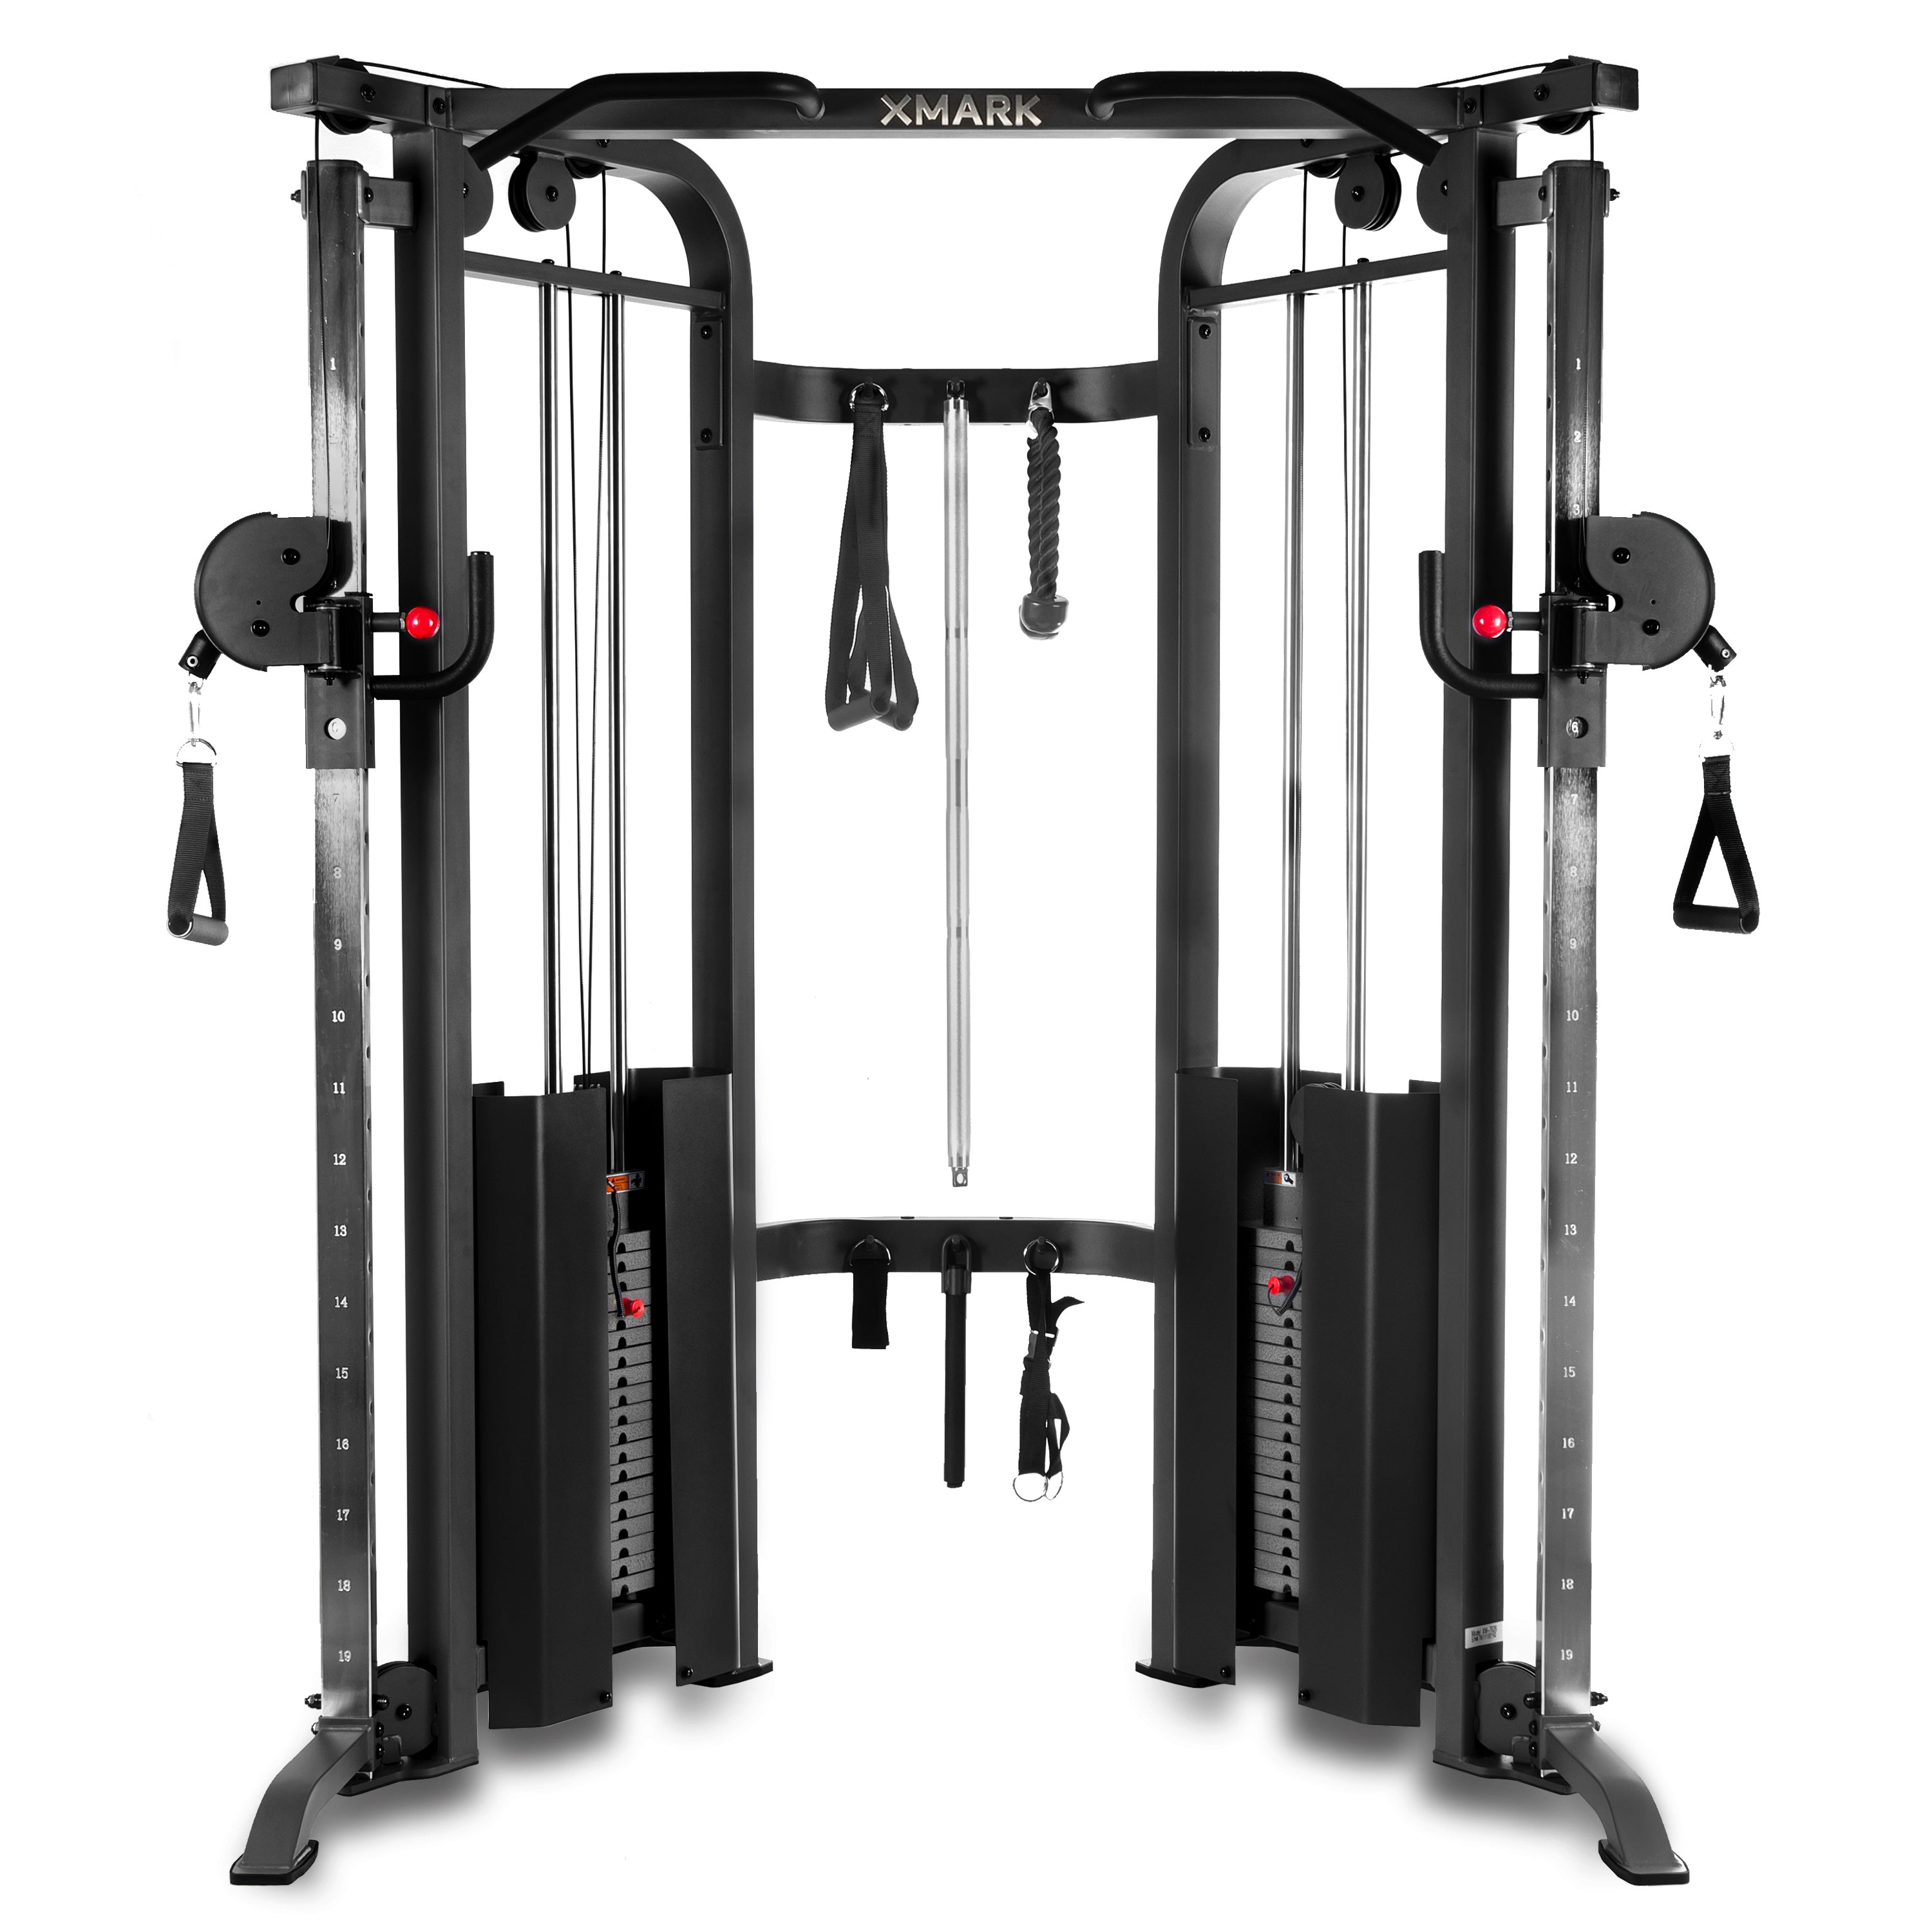 Tower 200 Door Gym Complete Full Body Workout Training System - Includes  Handles, Ankle Straps, Straight Bar, DVD + Workout Chart Home Gym Equipment